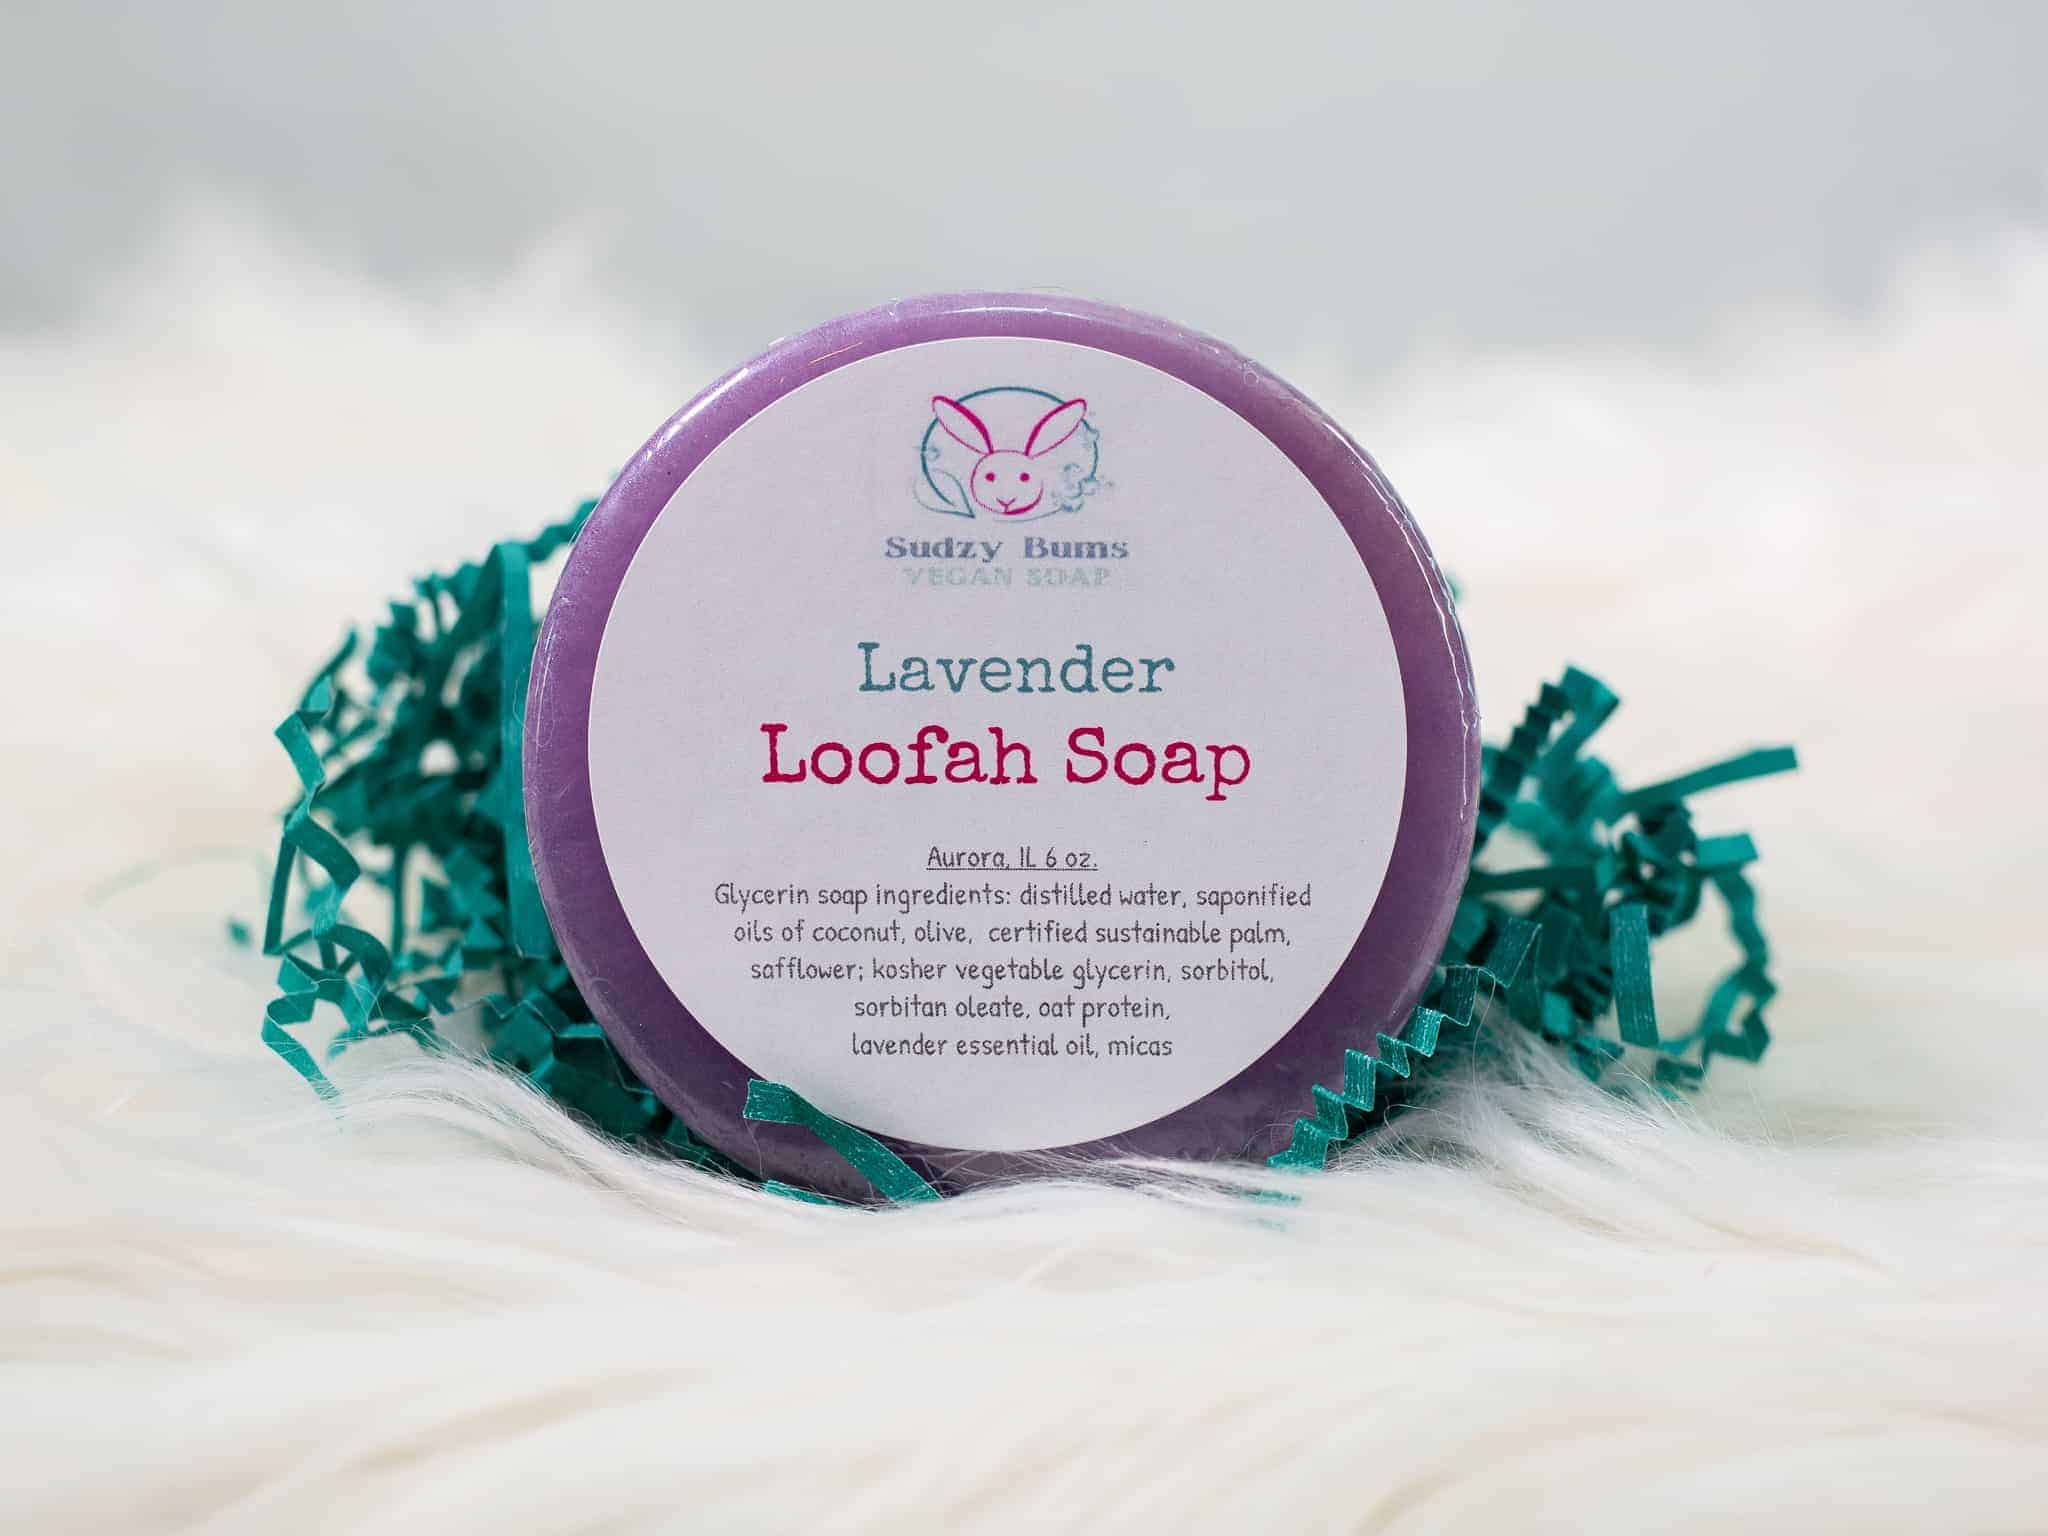 This Lavender Loofah Soap is made with love by Sudzy Bums! Shop more unique gift ideas today with Spots Initiatives, the best way to support creators.